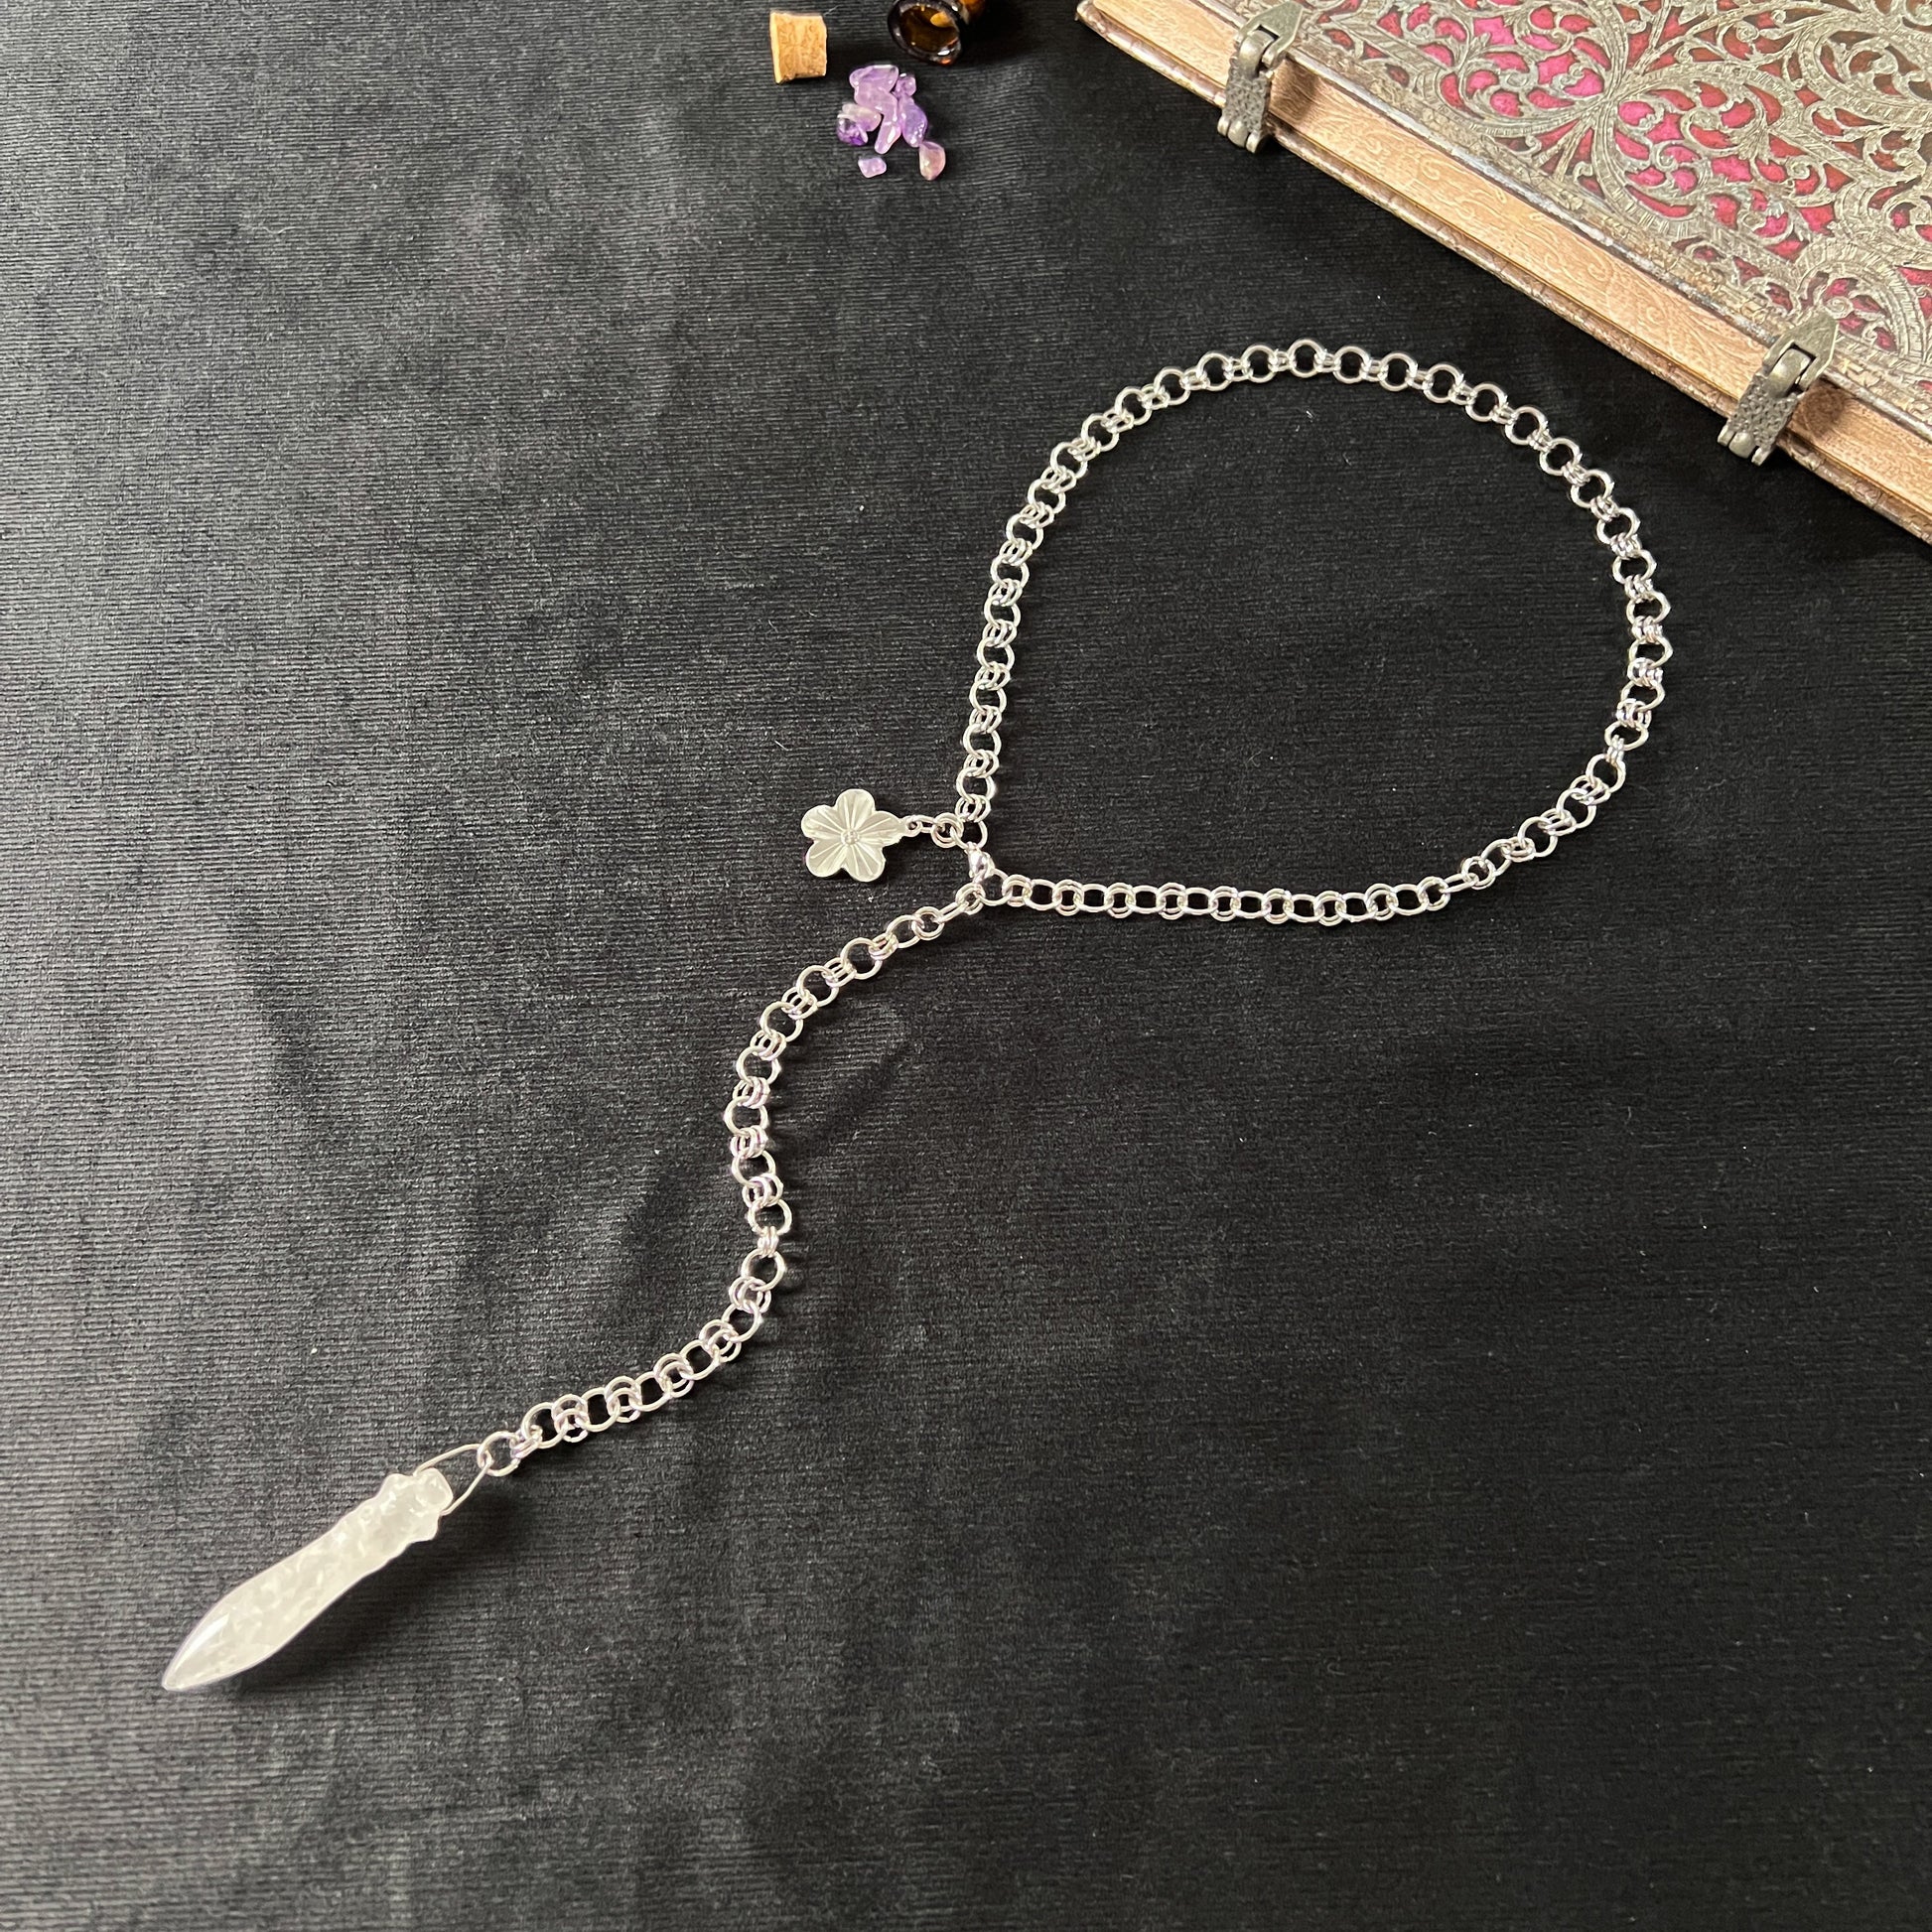 Quartz and flower Thot pendulum necklace, adjustable stainless steel chain Baguette Magick